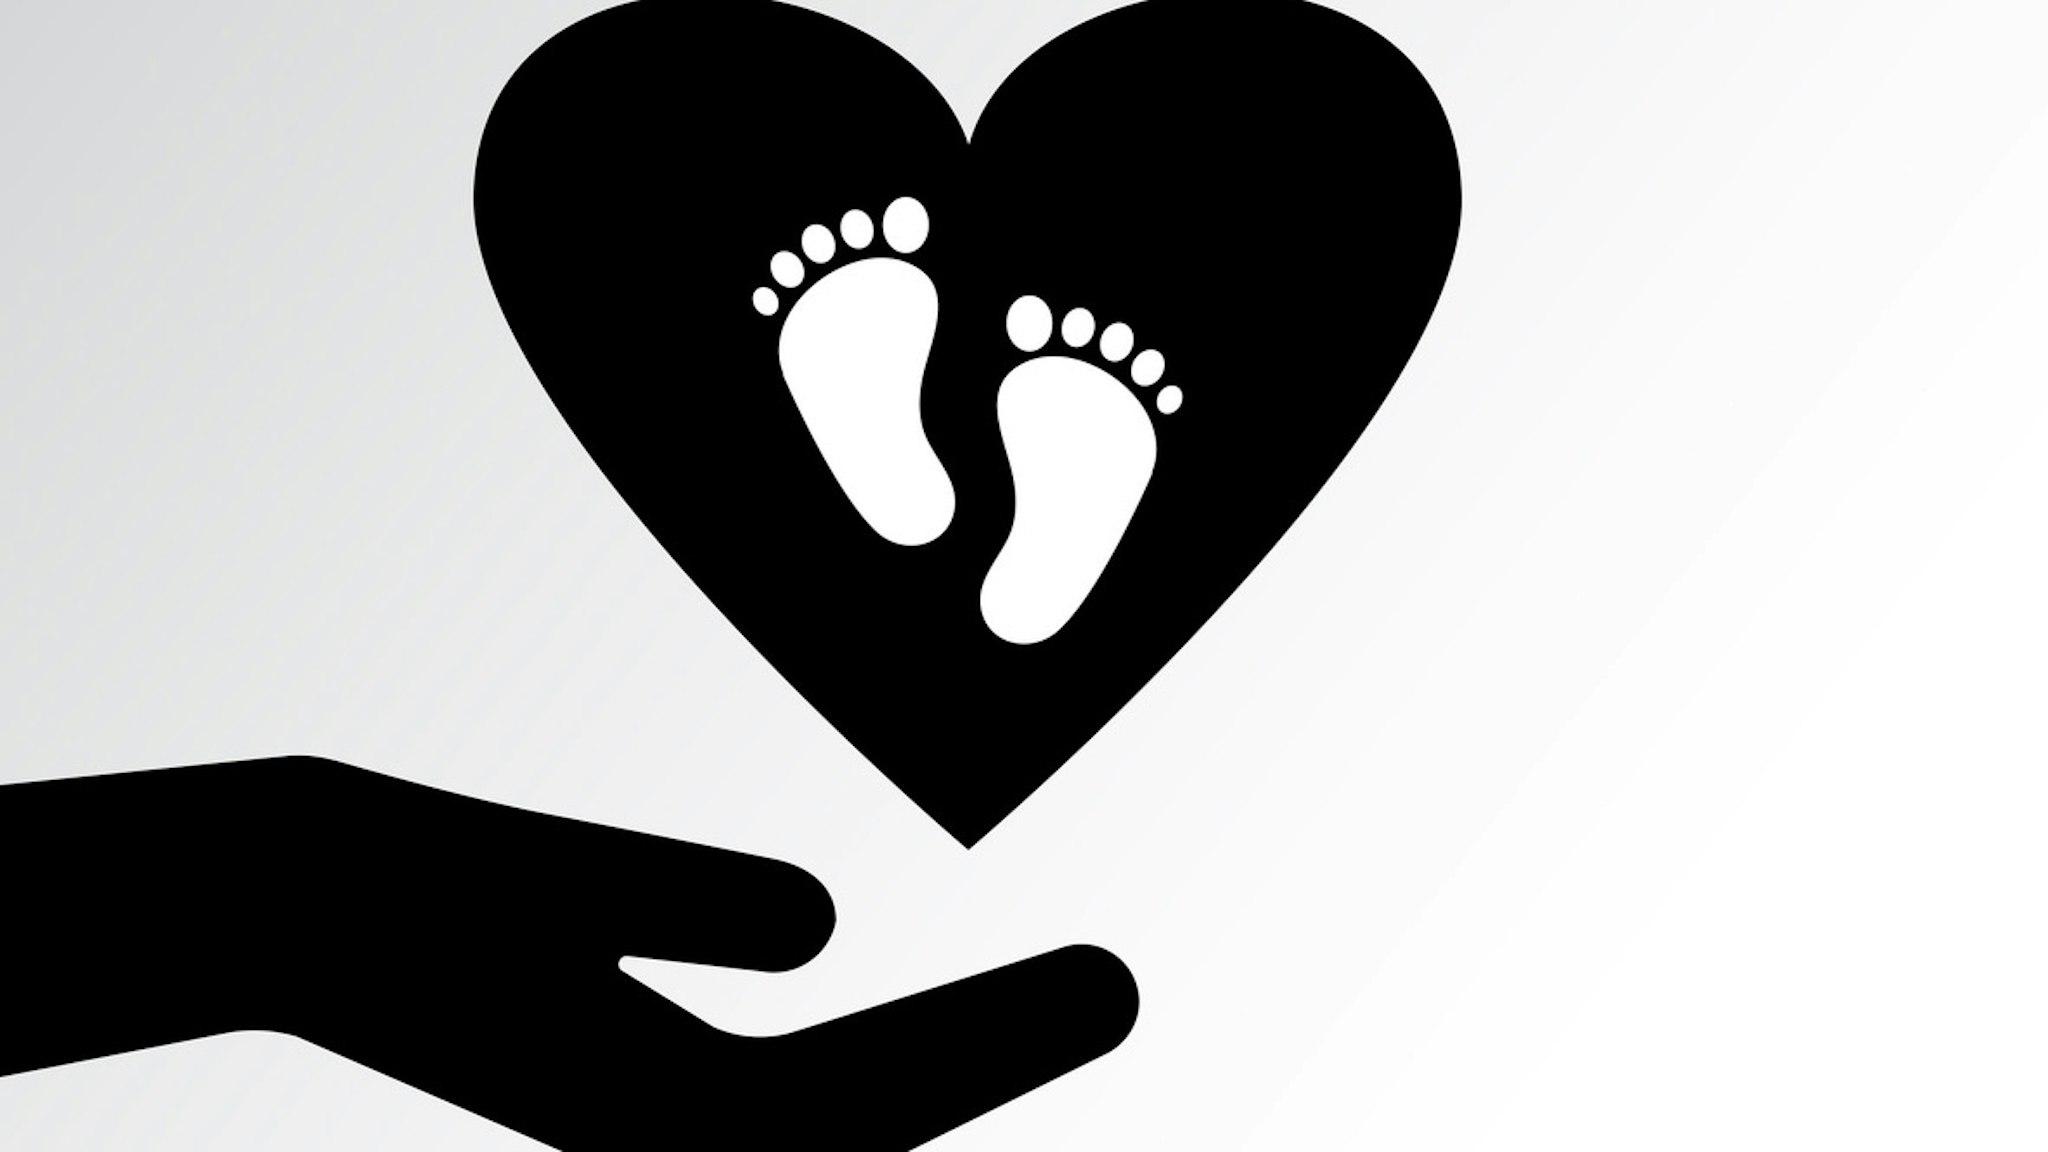 Family icon. Pregnancy sign. Caring for a child. Two hands protect the heart with footprints. Vector illustration - stock vector Family icon. Pregnancy sign. Caring for a child. Two hands protect the heart with footprints. Vector illustration